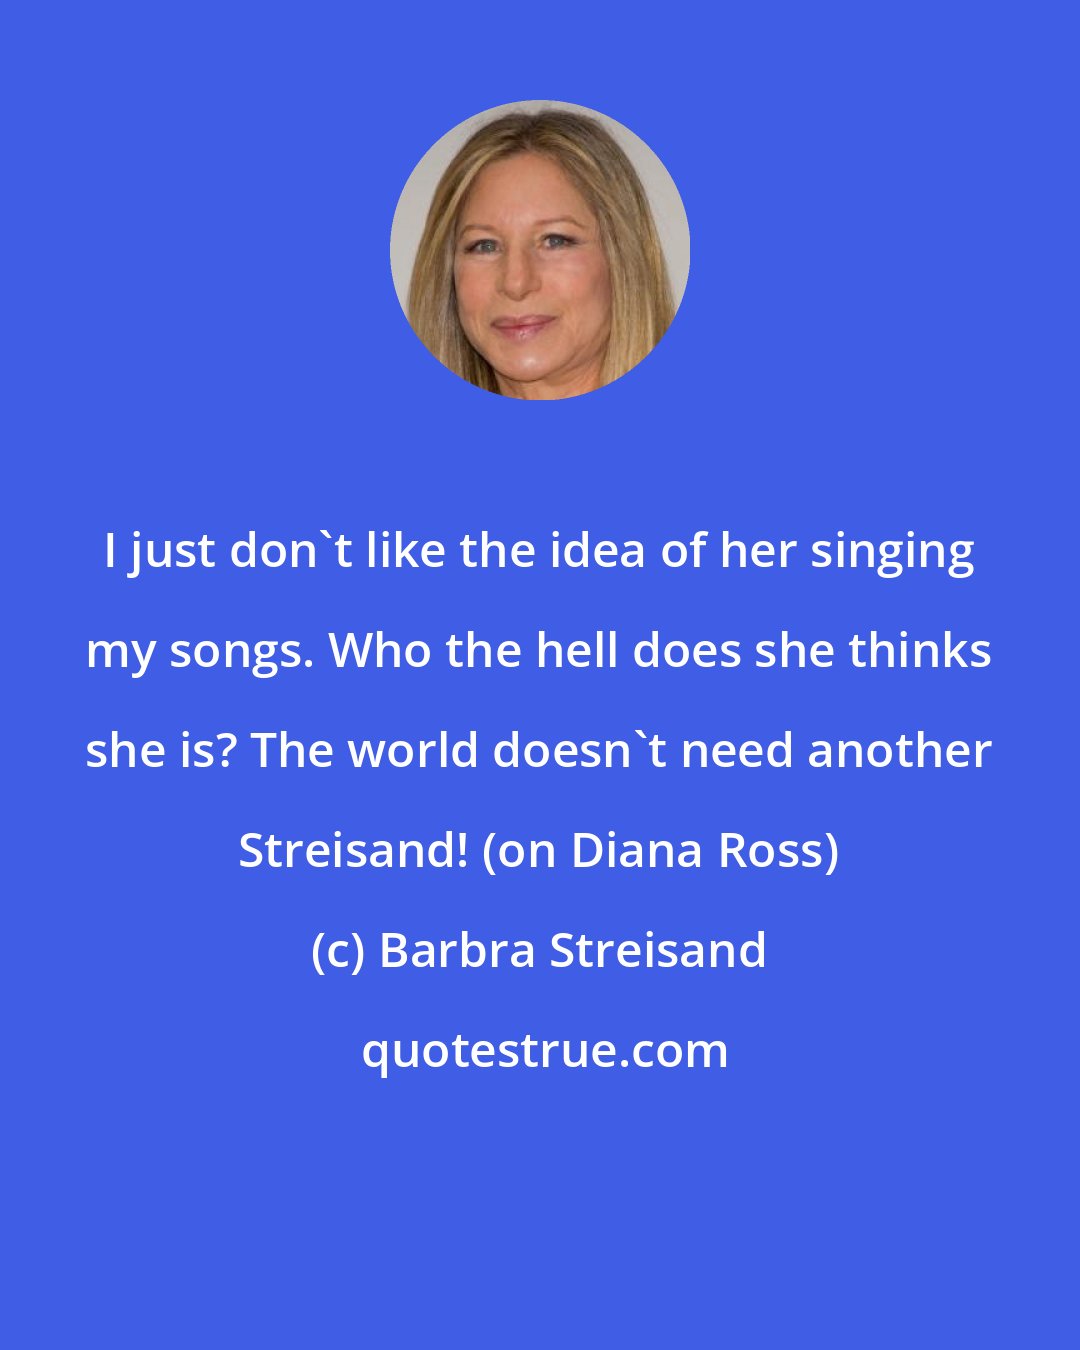 Barbra Streisand: I just don't like the idea of her singing my songs. Who the hell does she thinks she is? The world doesn't need another Streisand! (on Diana Ross)